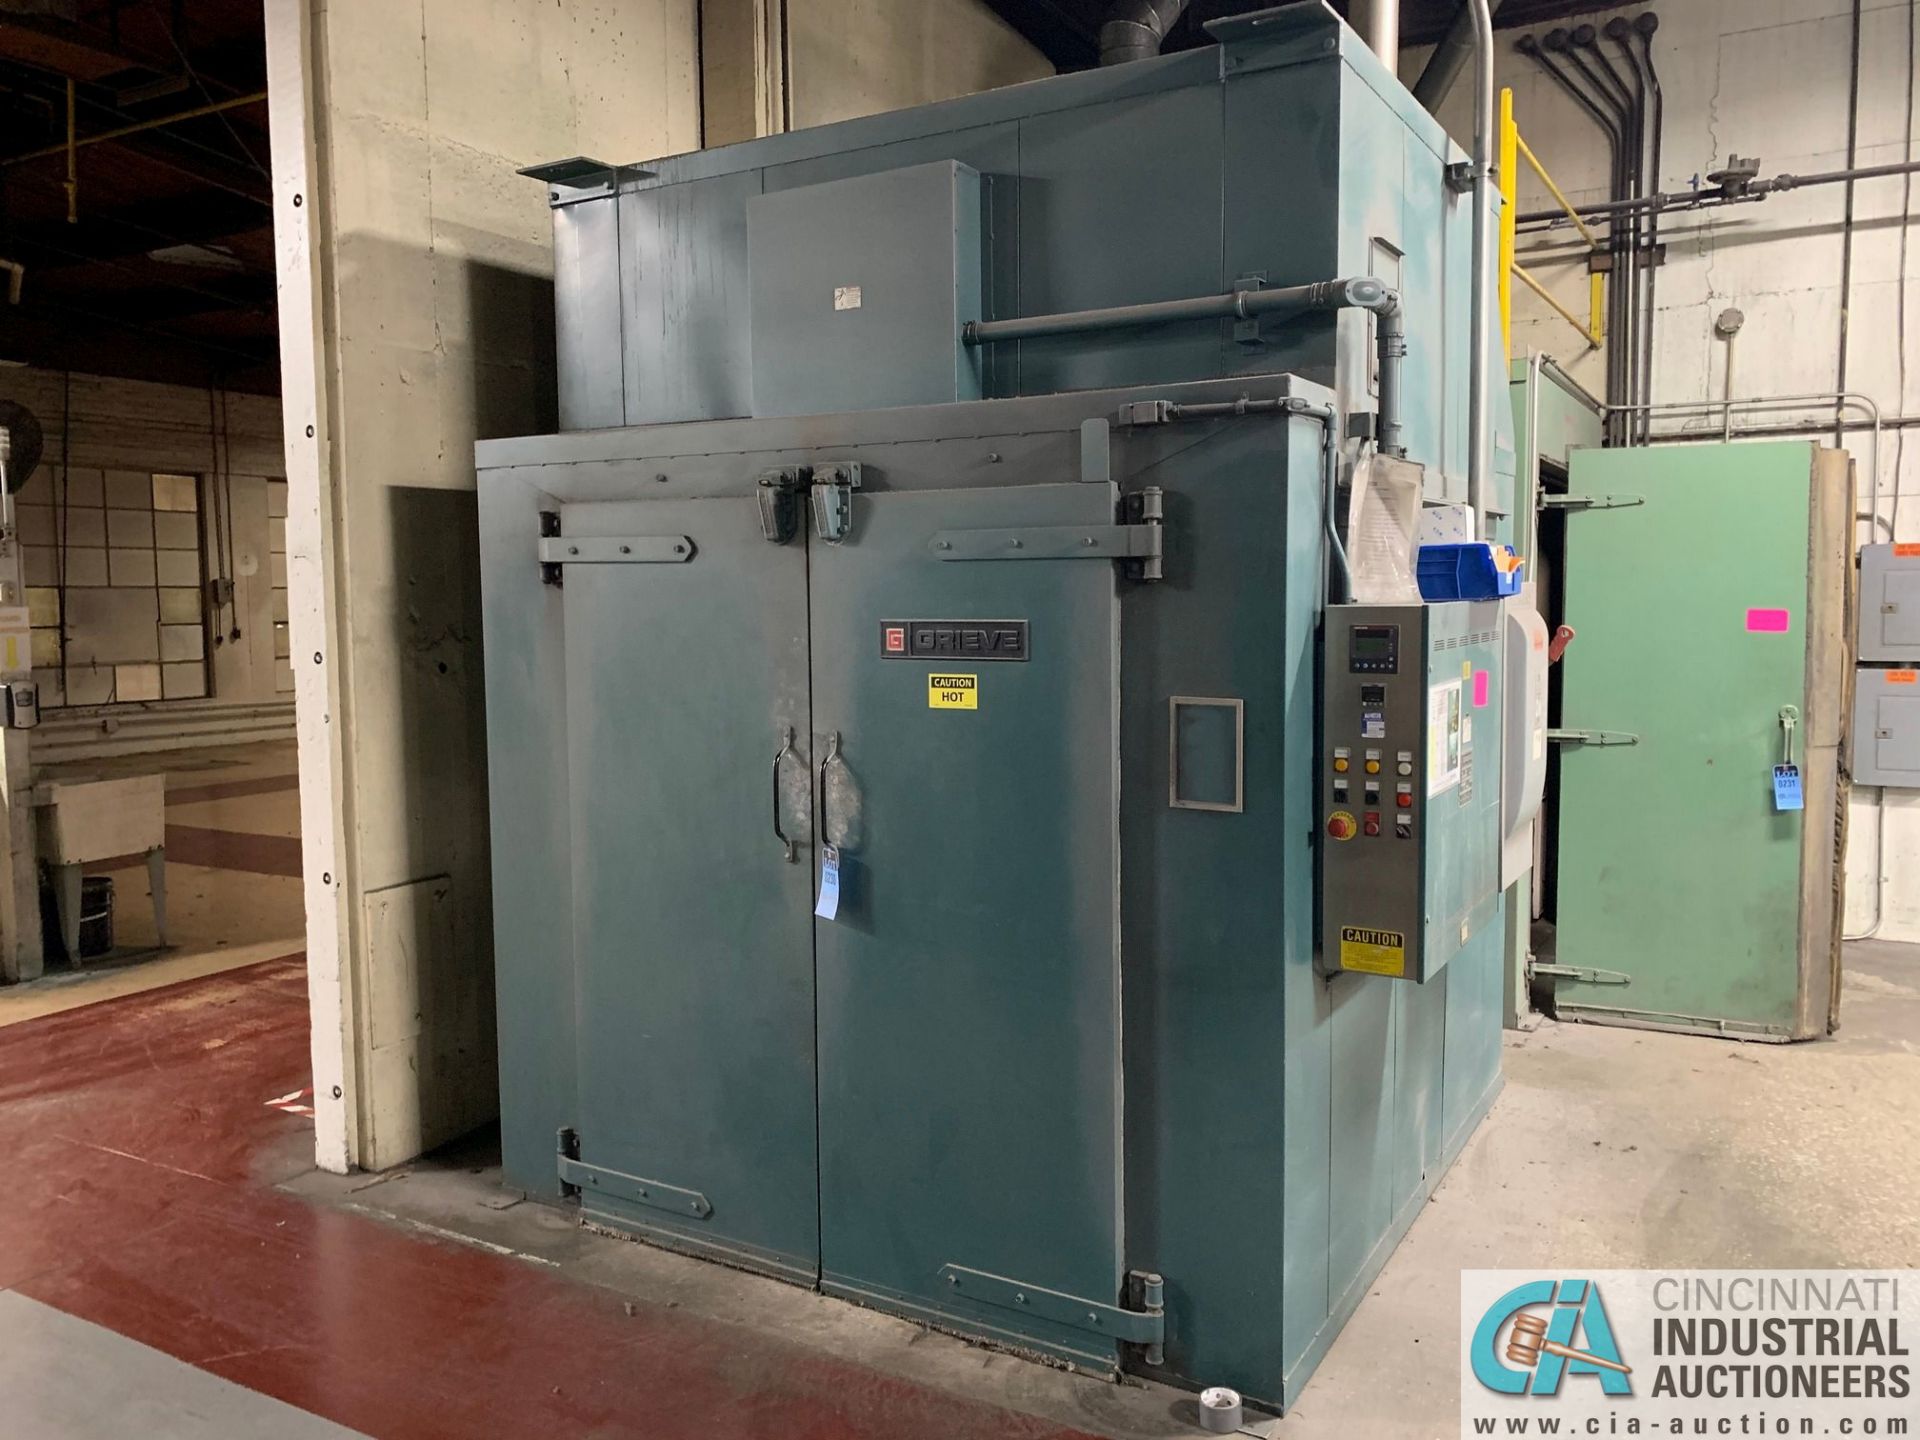 5' X 6' X 7' HIGH (APPROX.) GRIEVE MODEL WTH-566-800 ELECTRIC BATCH OVEN; S/N 94826A0708, 375 DEGREE